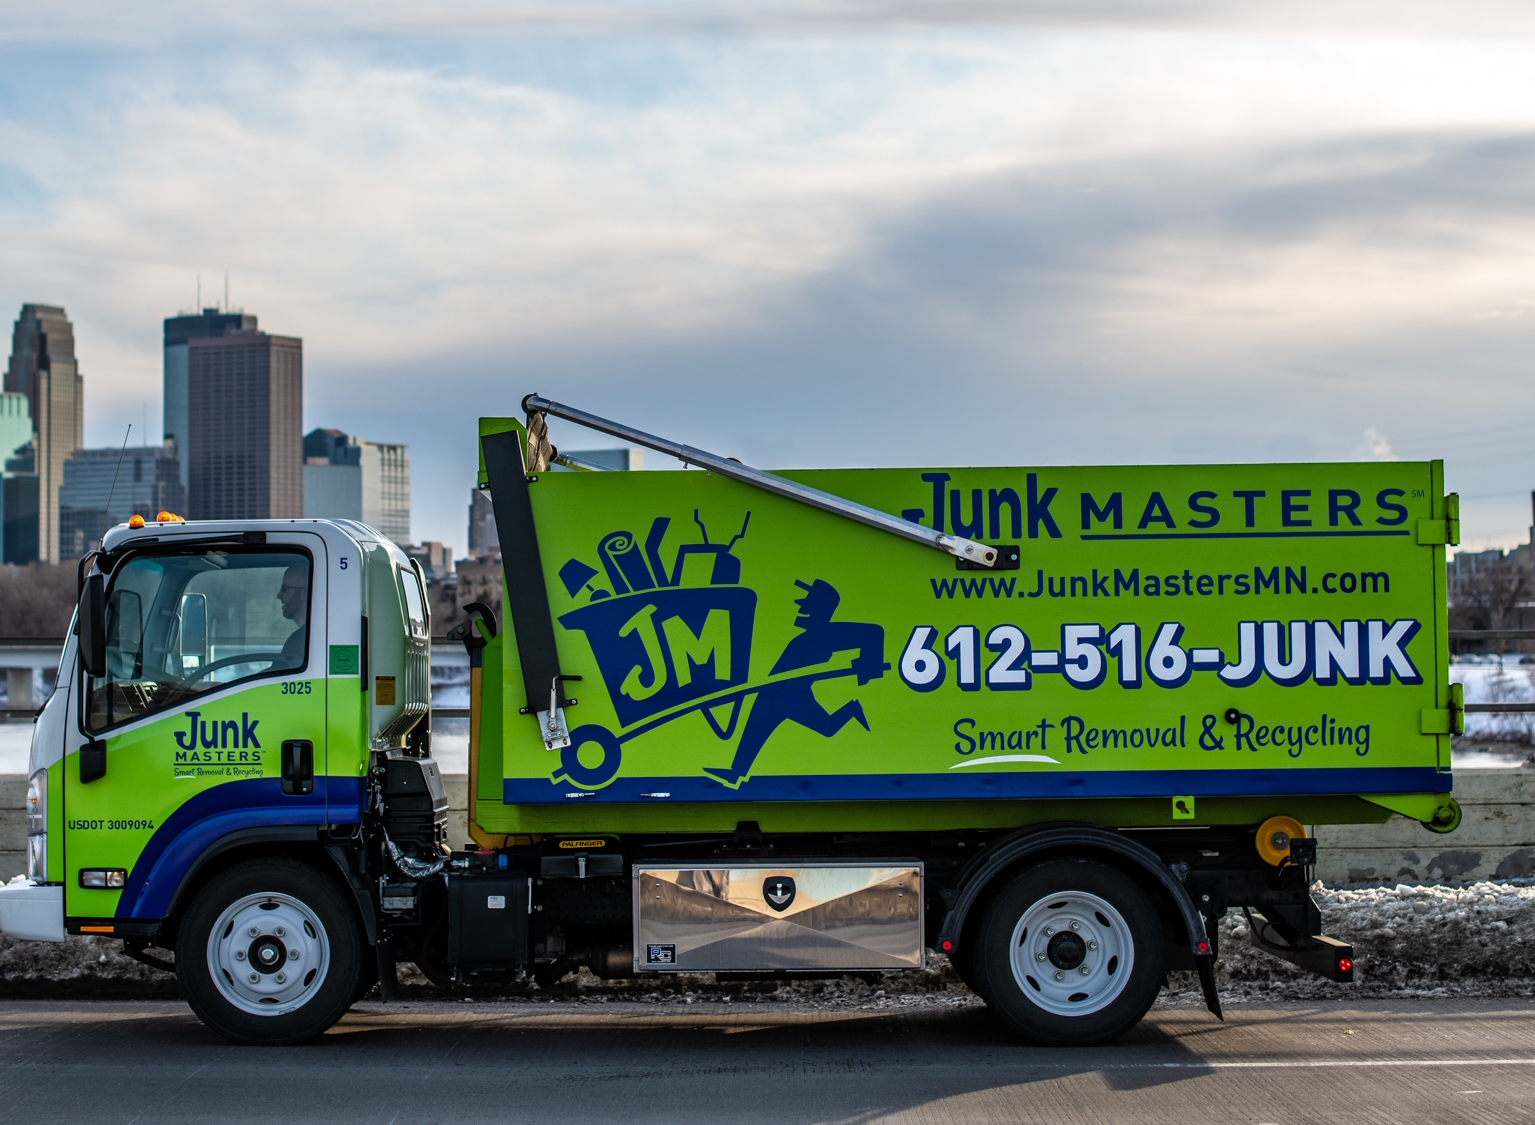 Junk Masters truck in the Twin Cities area to provide hot tub removal services